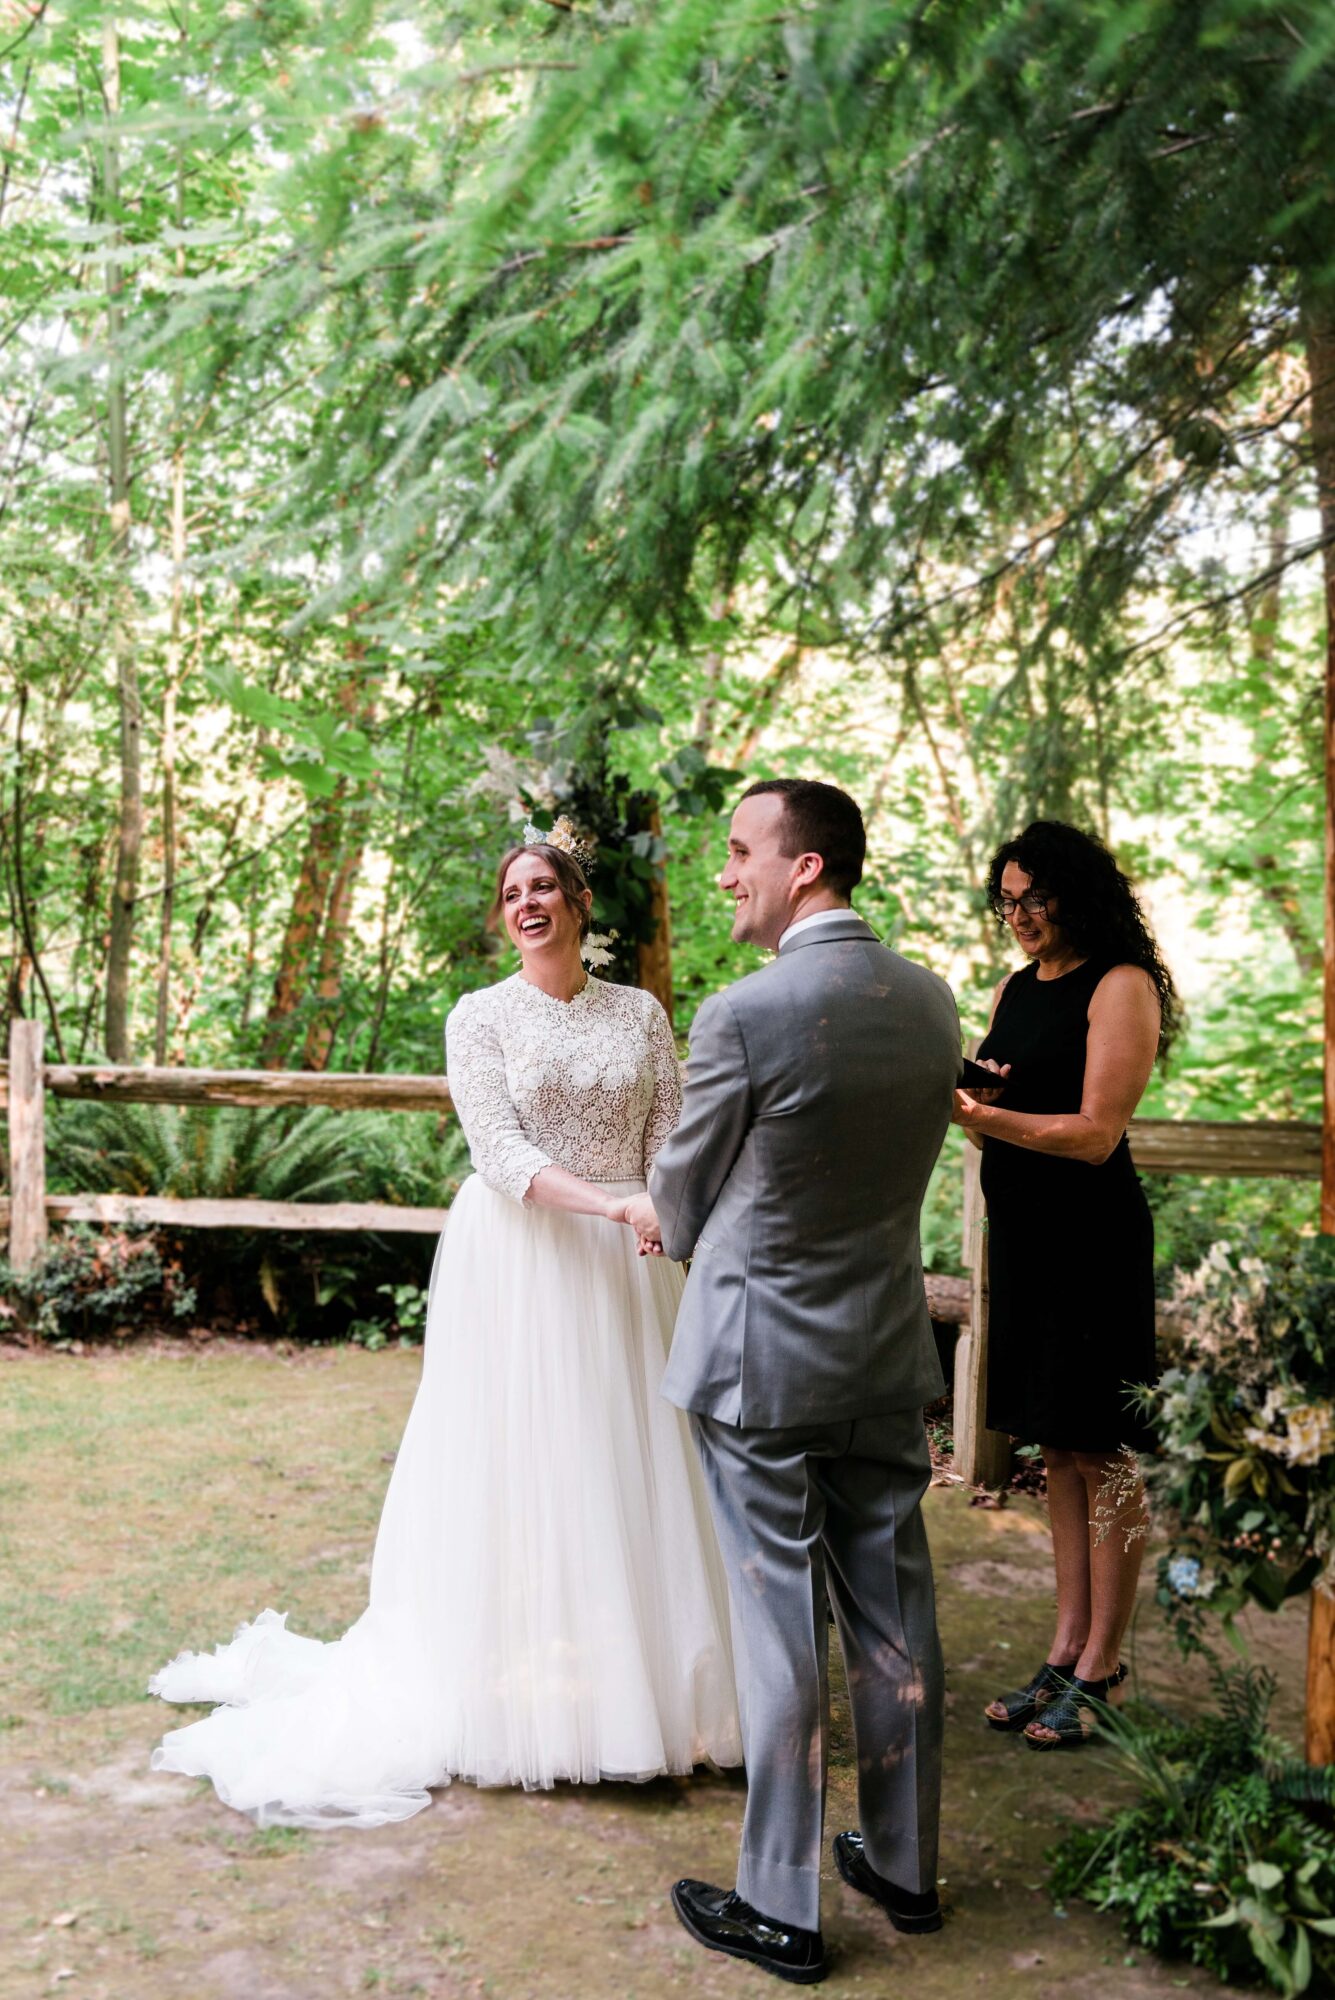 Forest wedding ceremony at the Grotto at St. Edward park in Kenmore outside Seattle WA